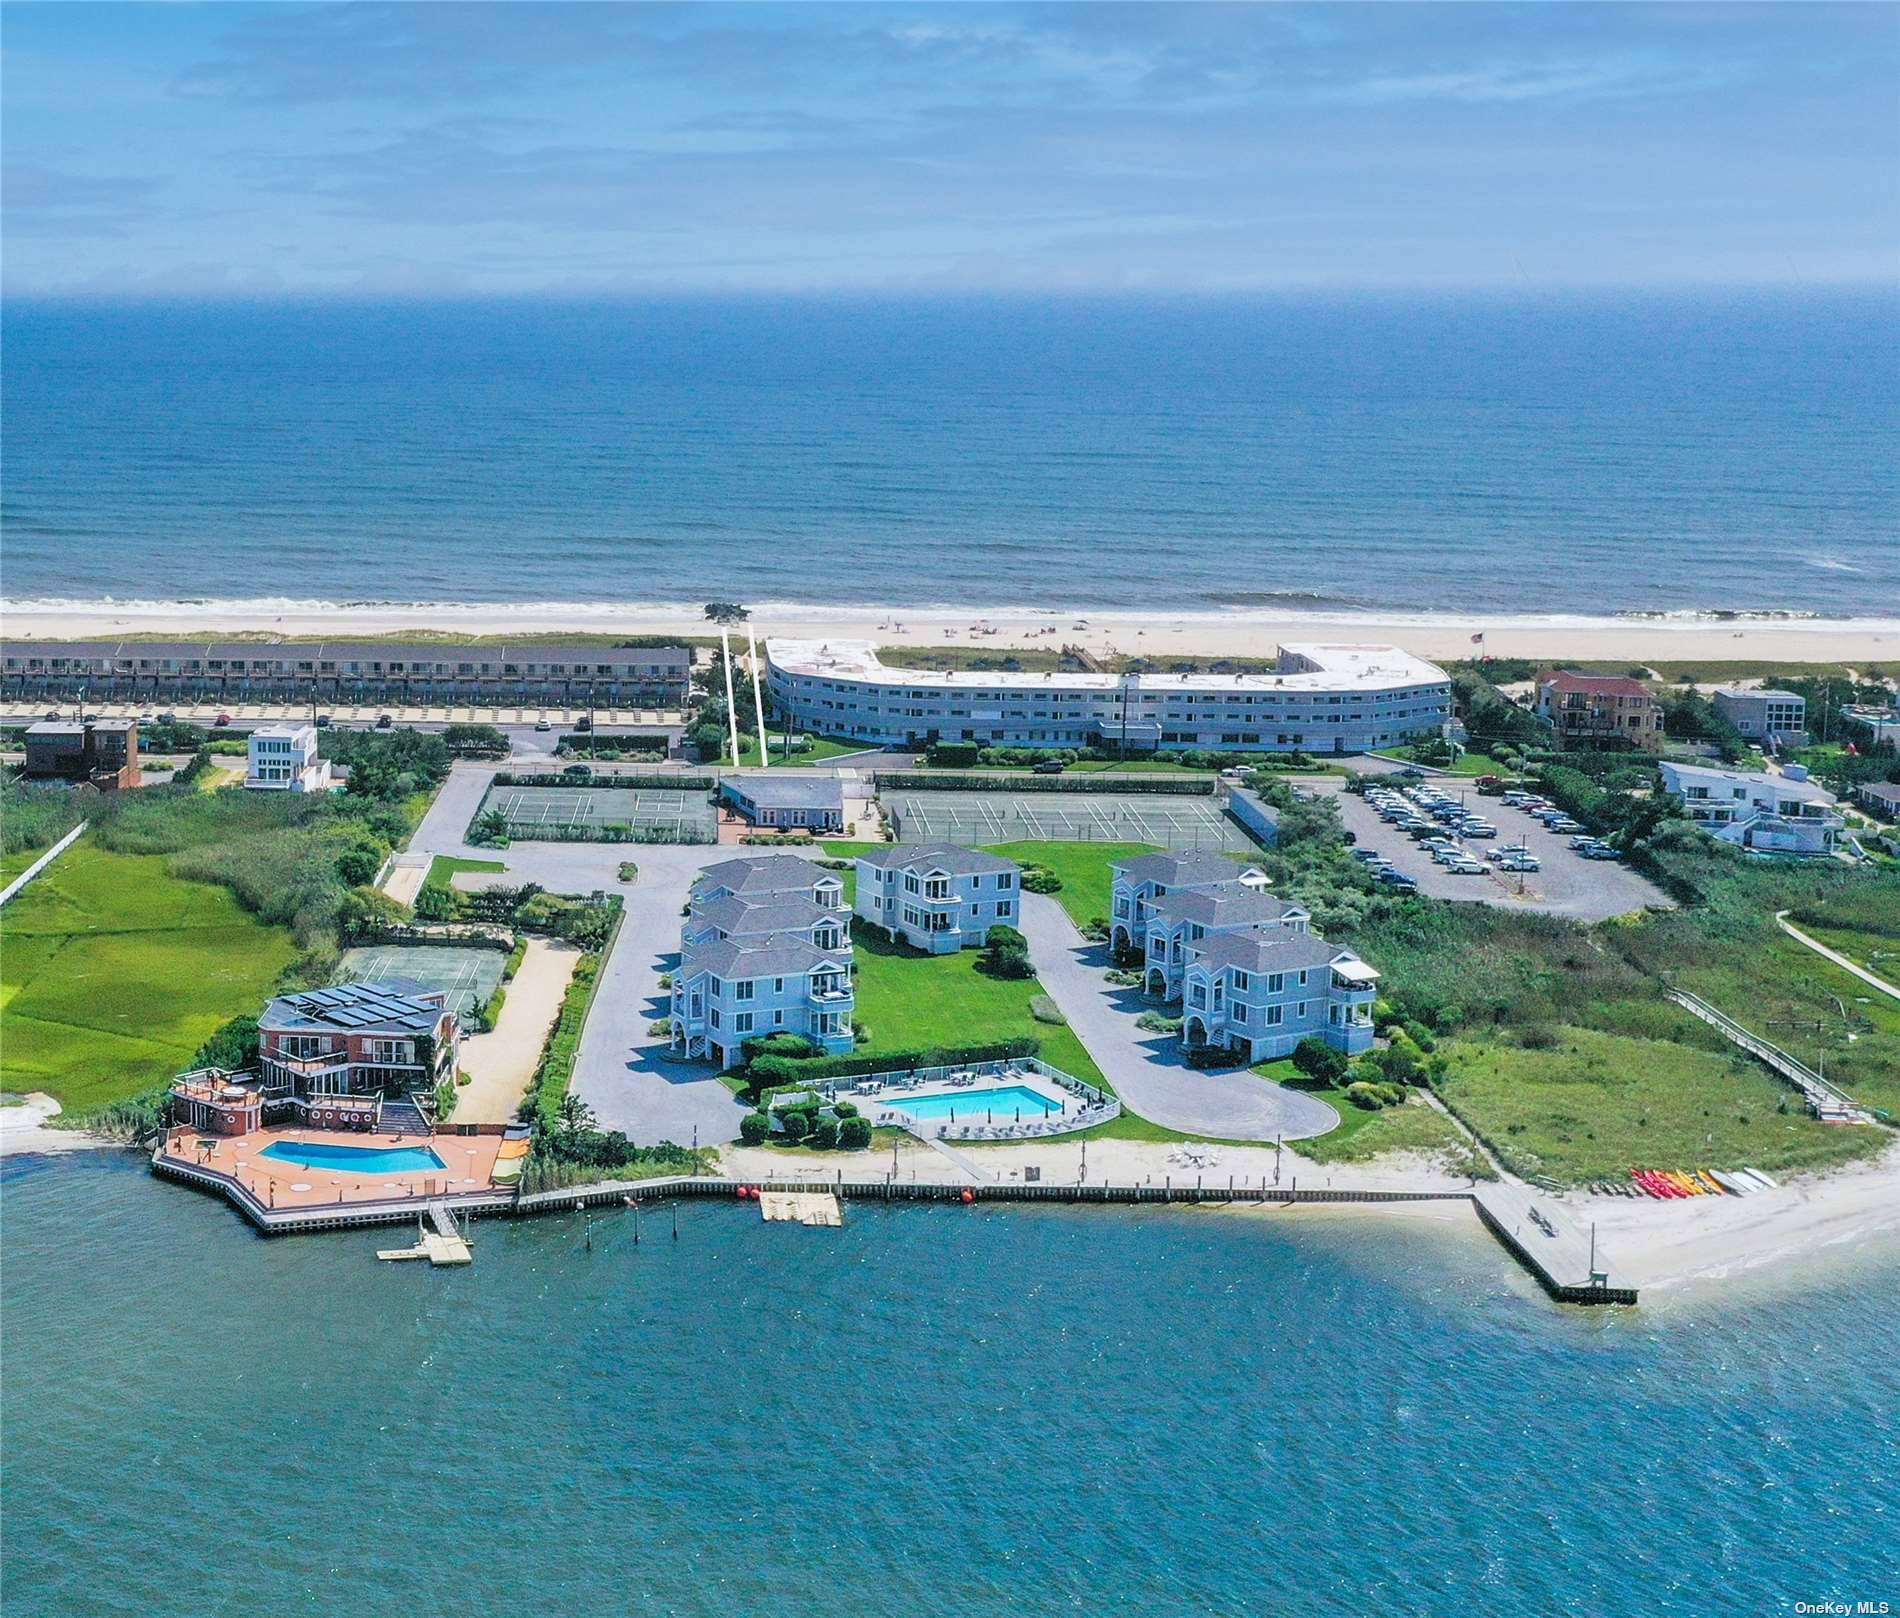 Introducing a luxurious bayfront lifestyle at The Hamptons Court and Marina !